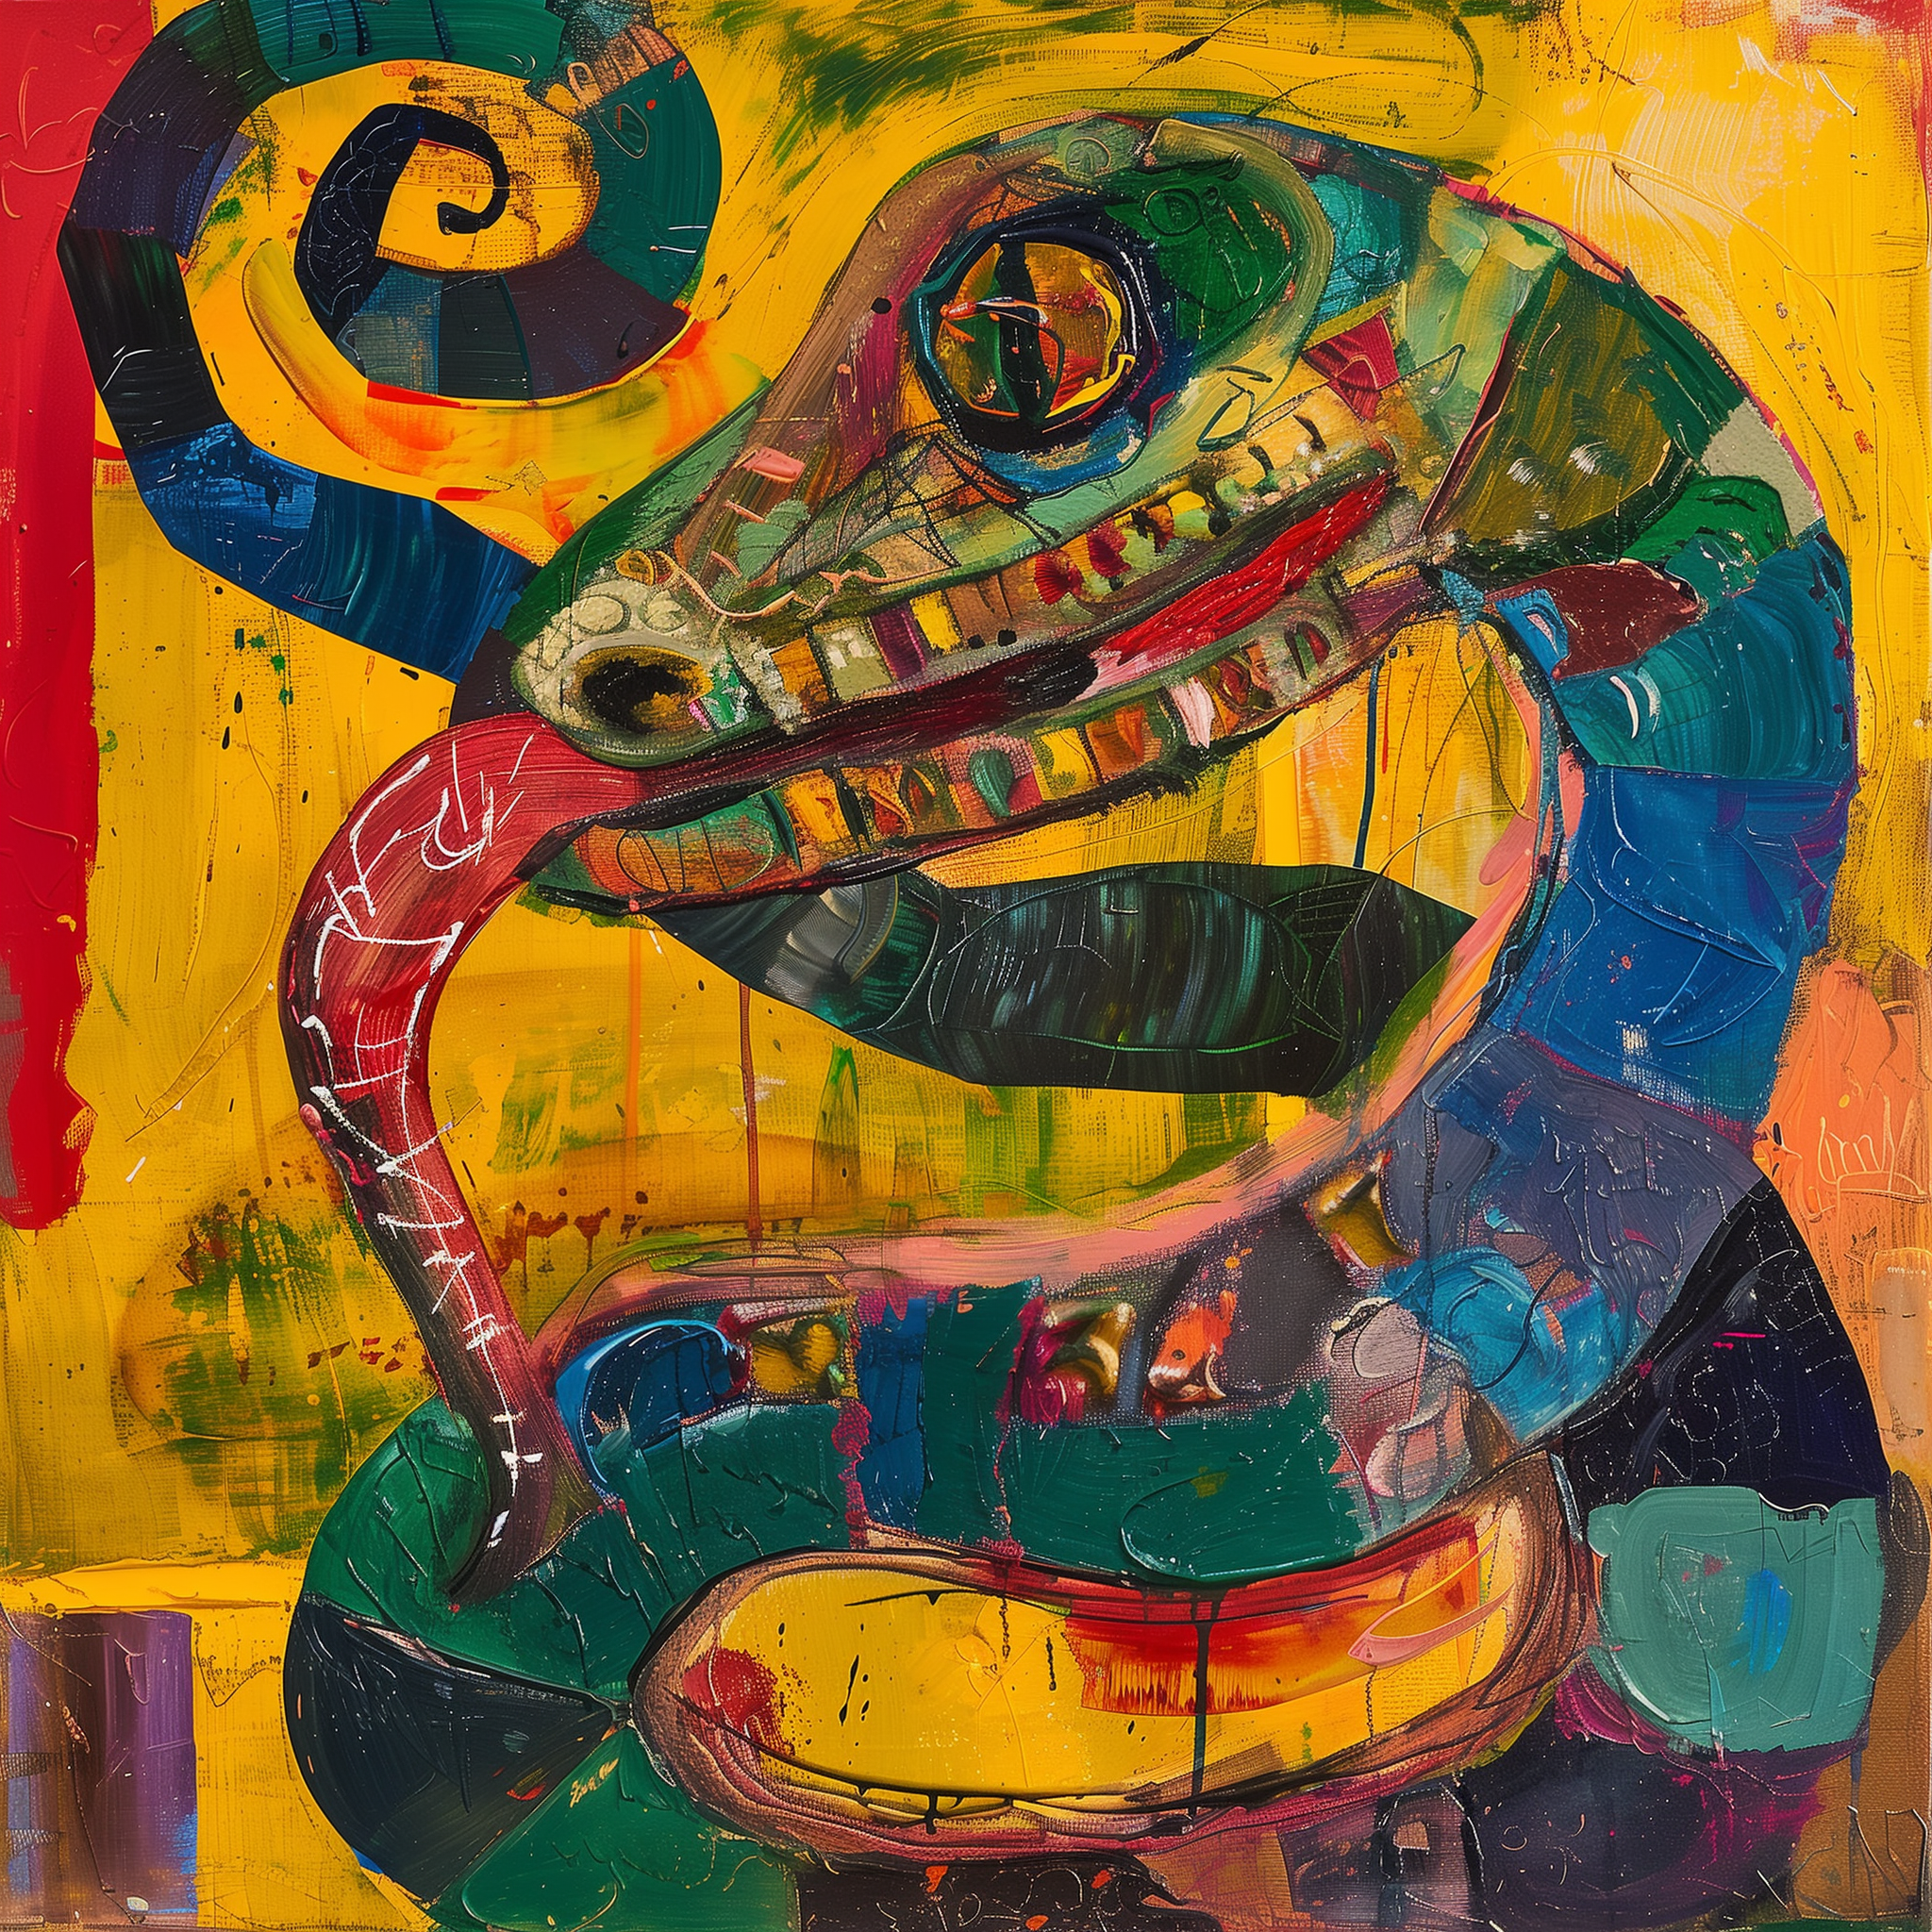 Colorful artistic snake painting avatar.